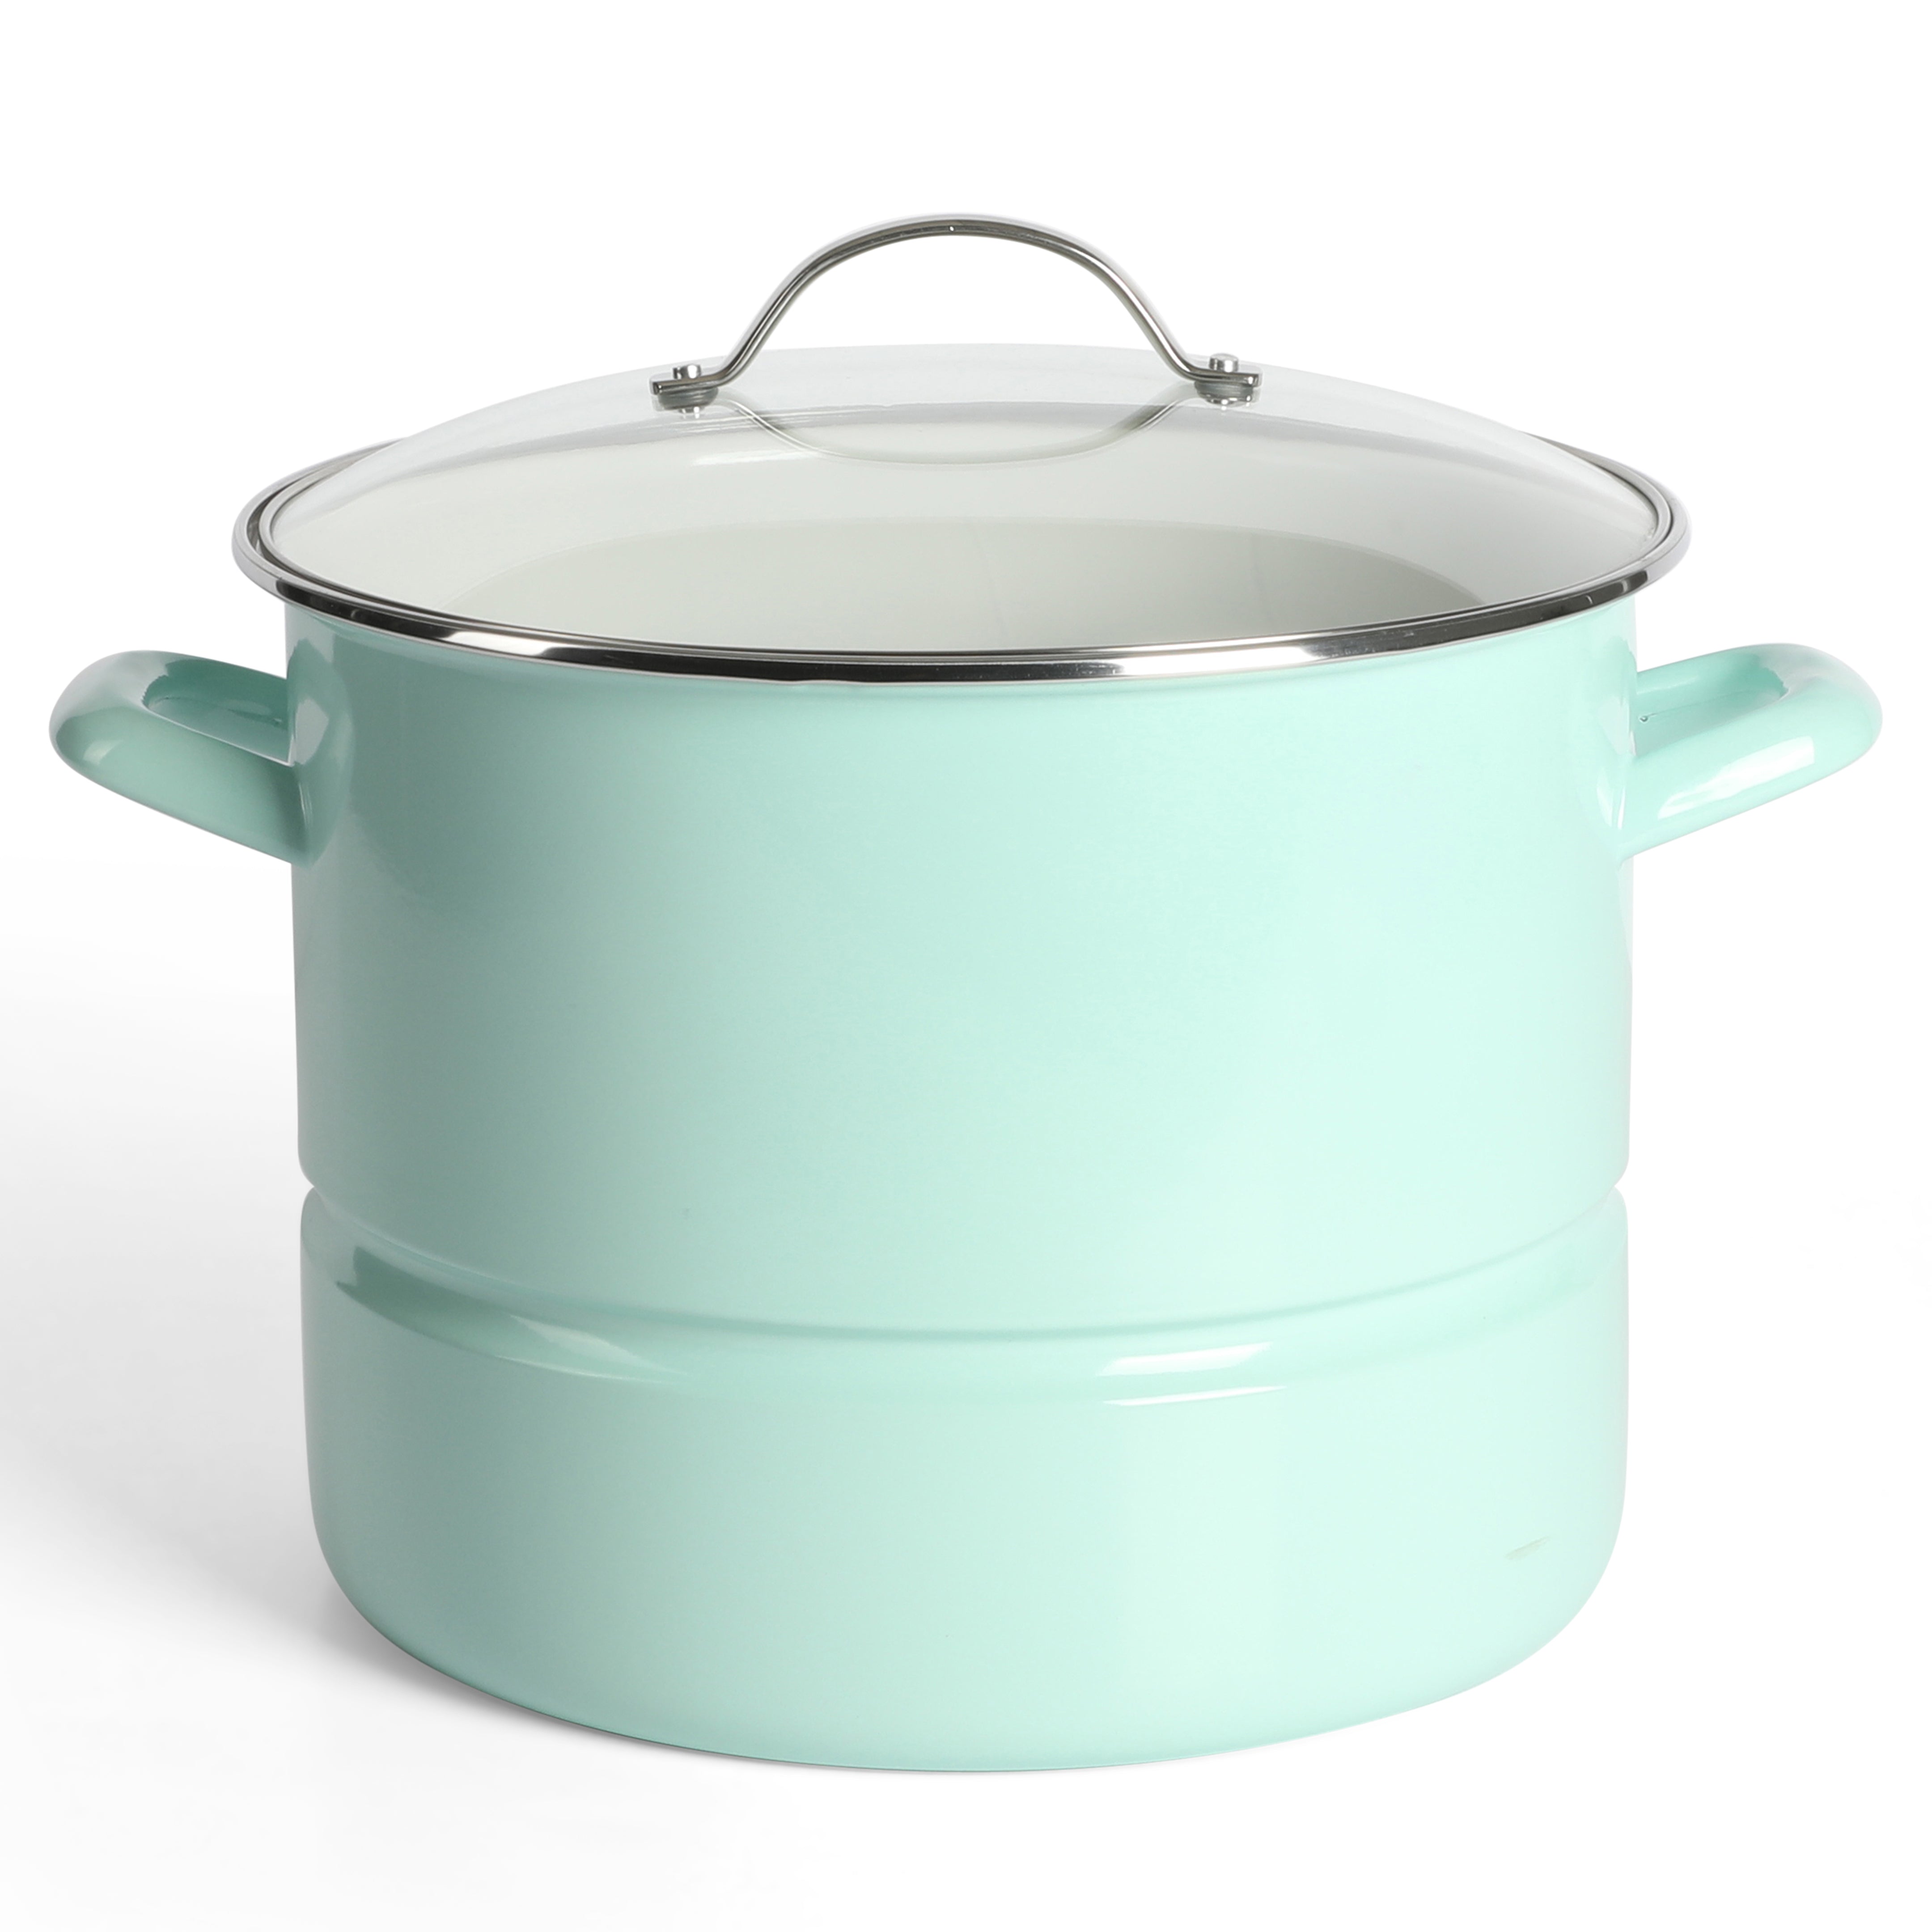 Chef Classic Enamel on Steel Cookware 16 Quart Stockpot with Cover 